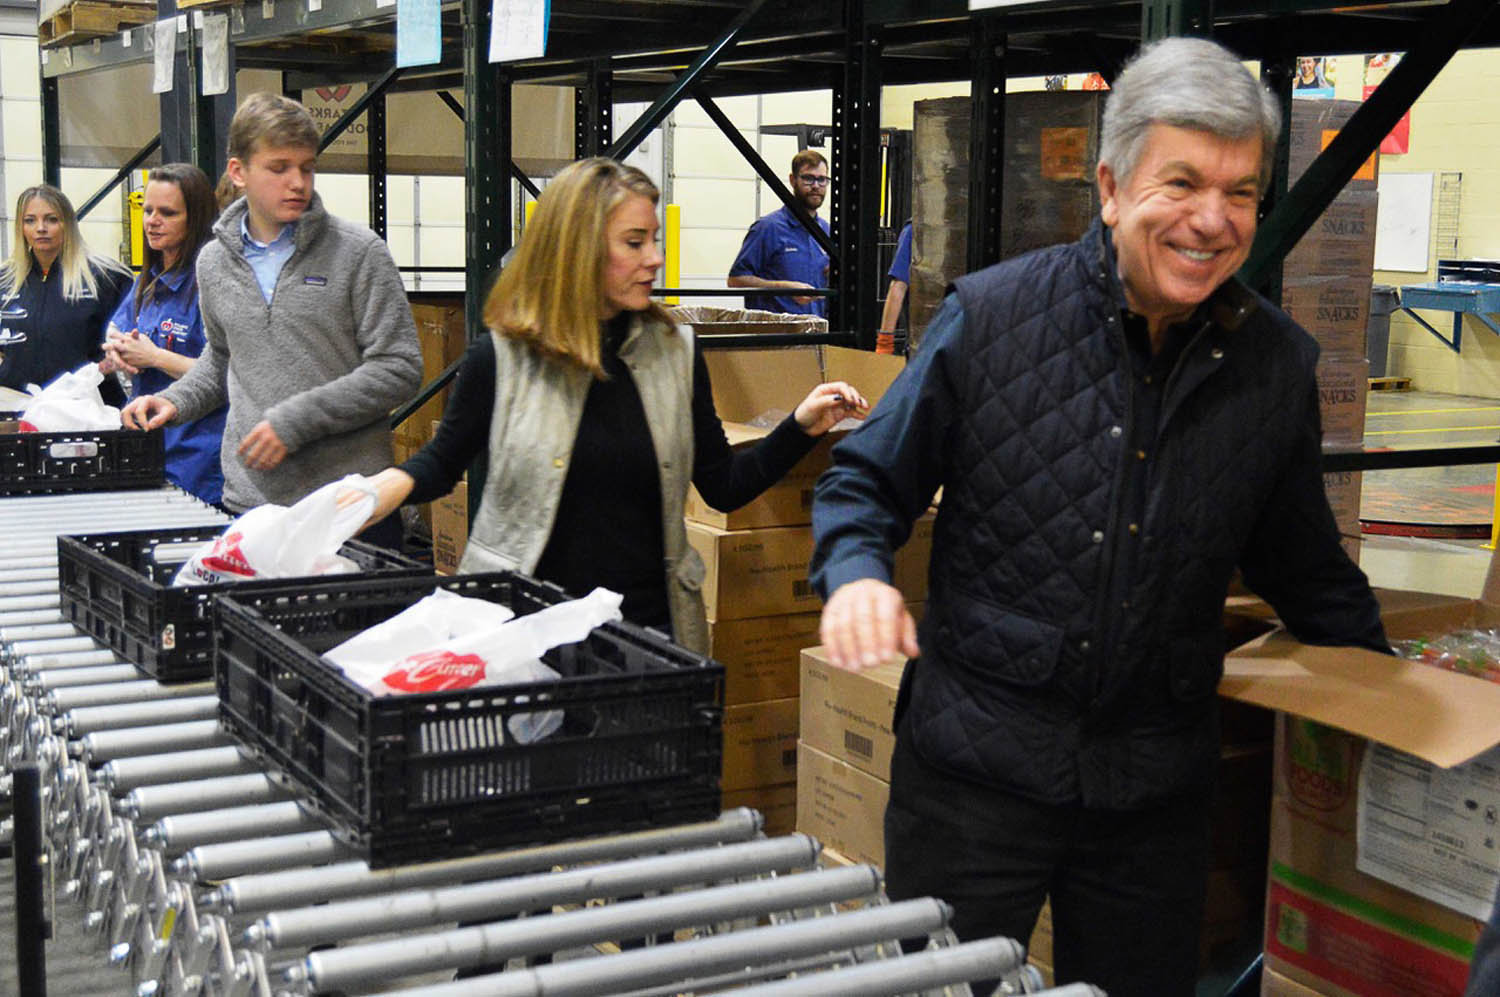 VOLUNTEER SENATOR
U.S. Sen. Roy Blunt, at right, packs bags of food Dec. 30 at Ozarks Food Harvest. He visited the food bank to thank volunteers for their service during the holidays and to bring attention to the issue of food insecurity in southwest Missouri. Officials say January and February are peak demand months.